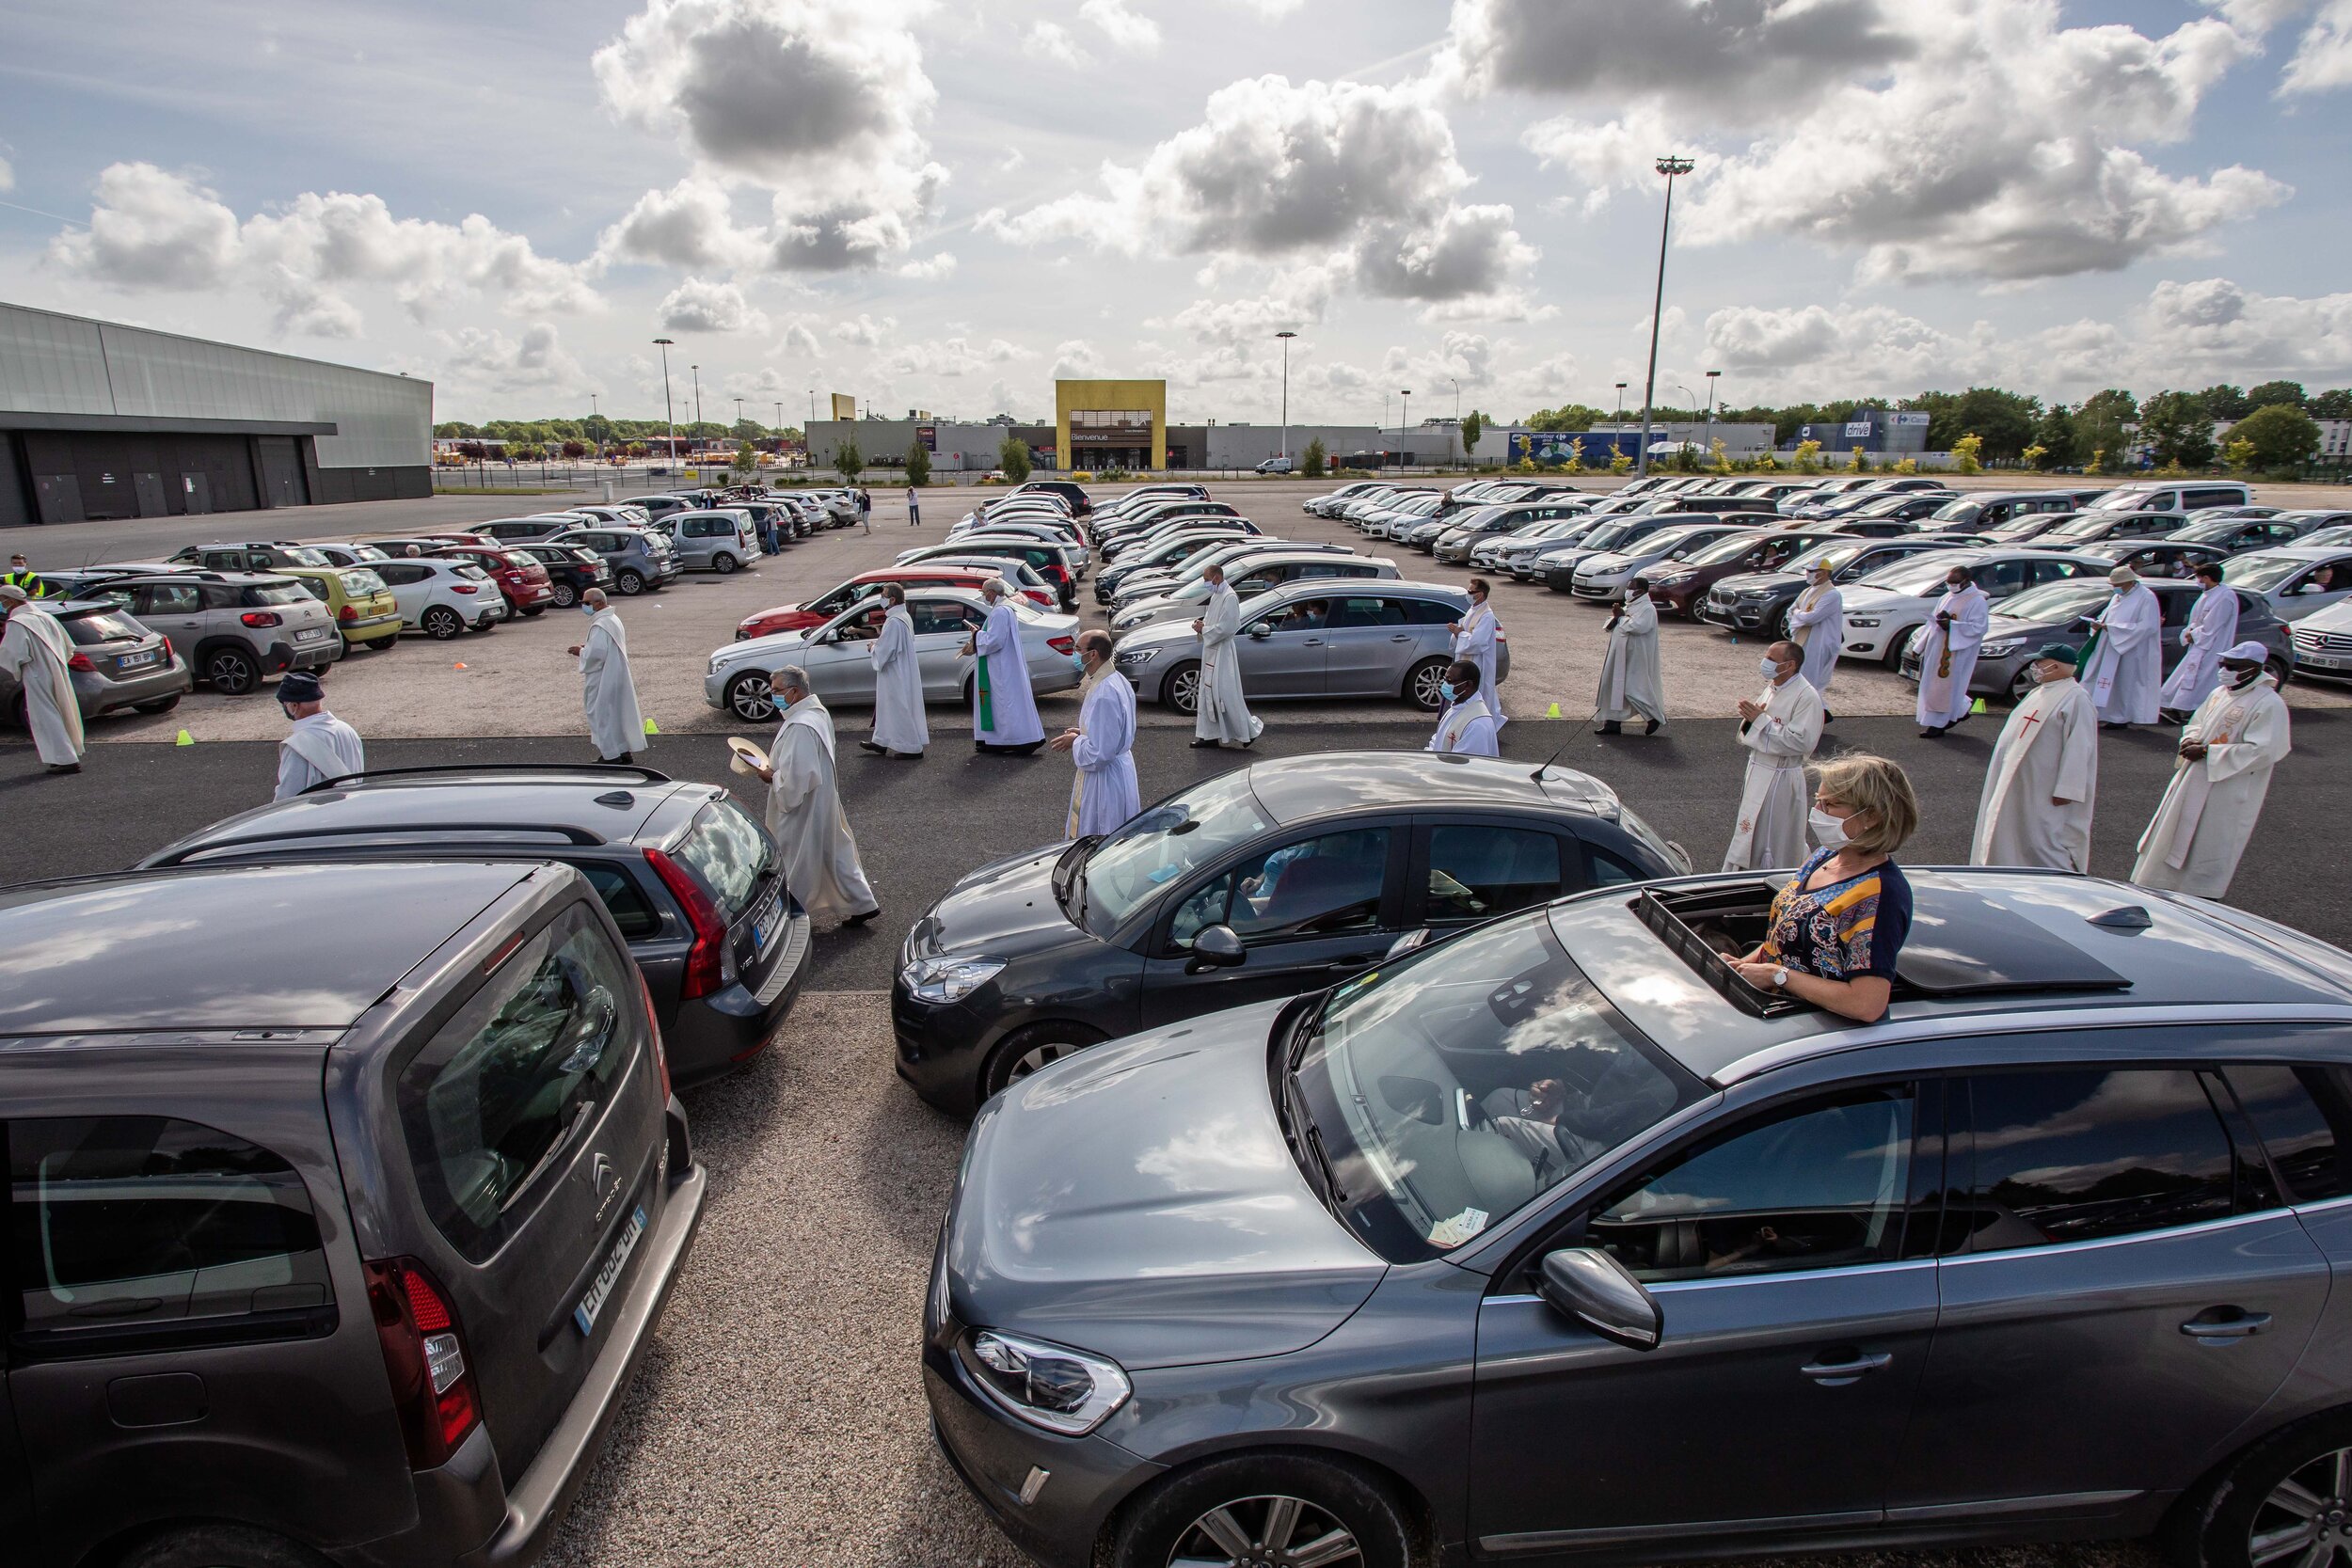   © Aurélien Morissard / IP3; A photo taken on 24 May 2020 shows priests and officiants wearing protective masks during the celebration of the second drive-thru mass in Chalons-en-Champagne, northeastern France.   